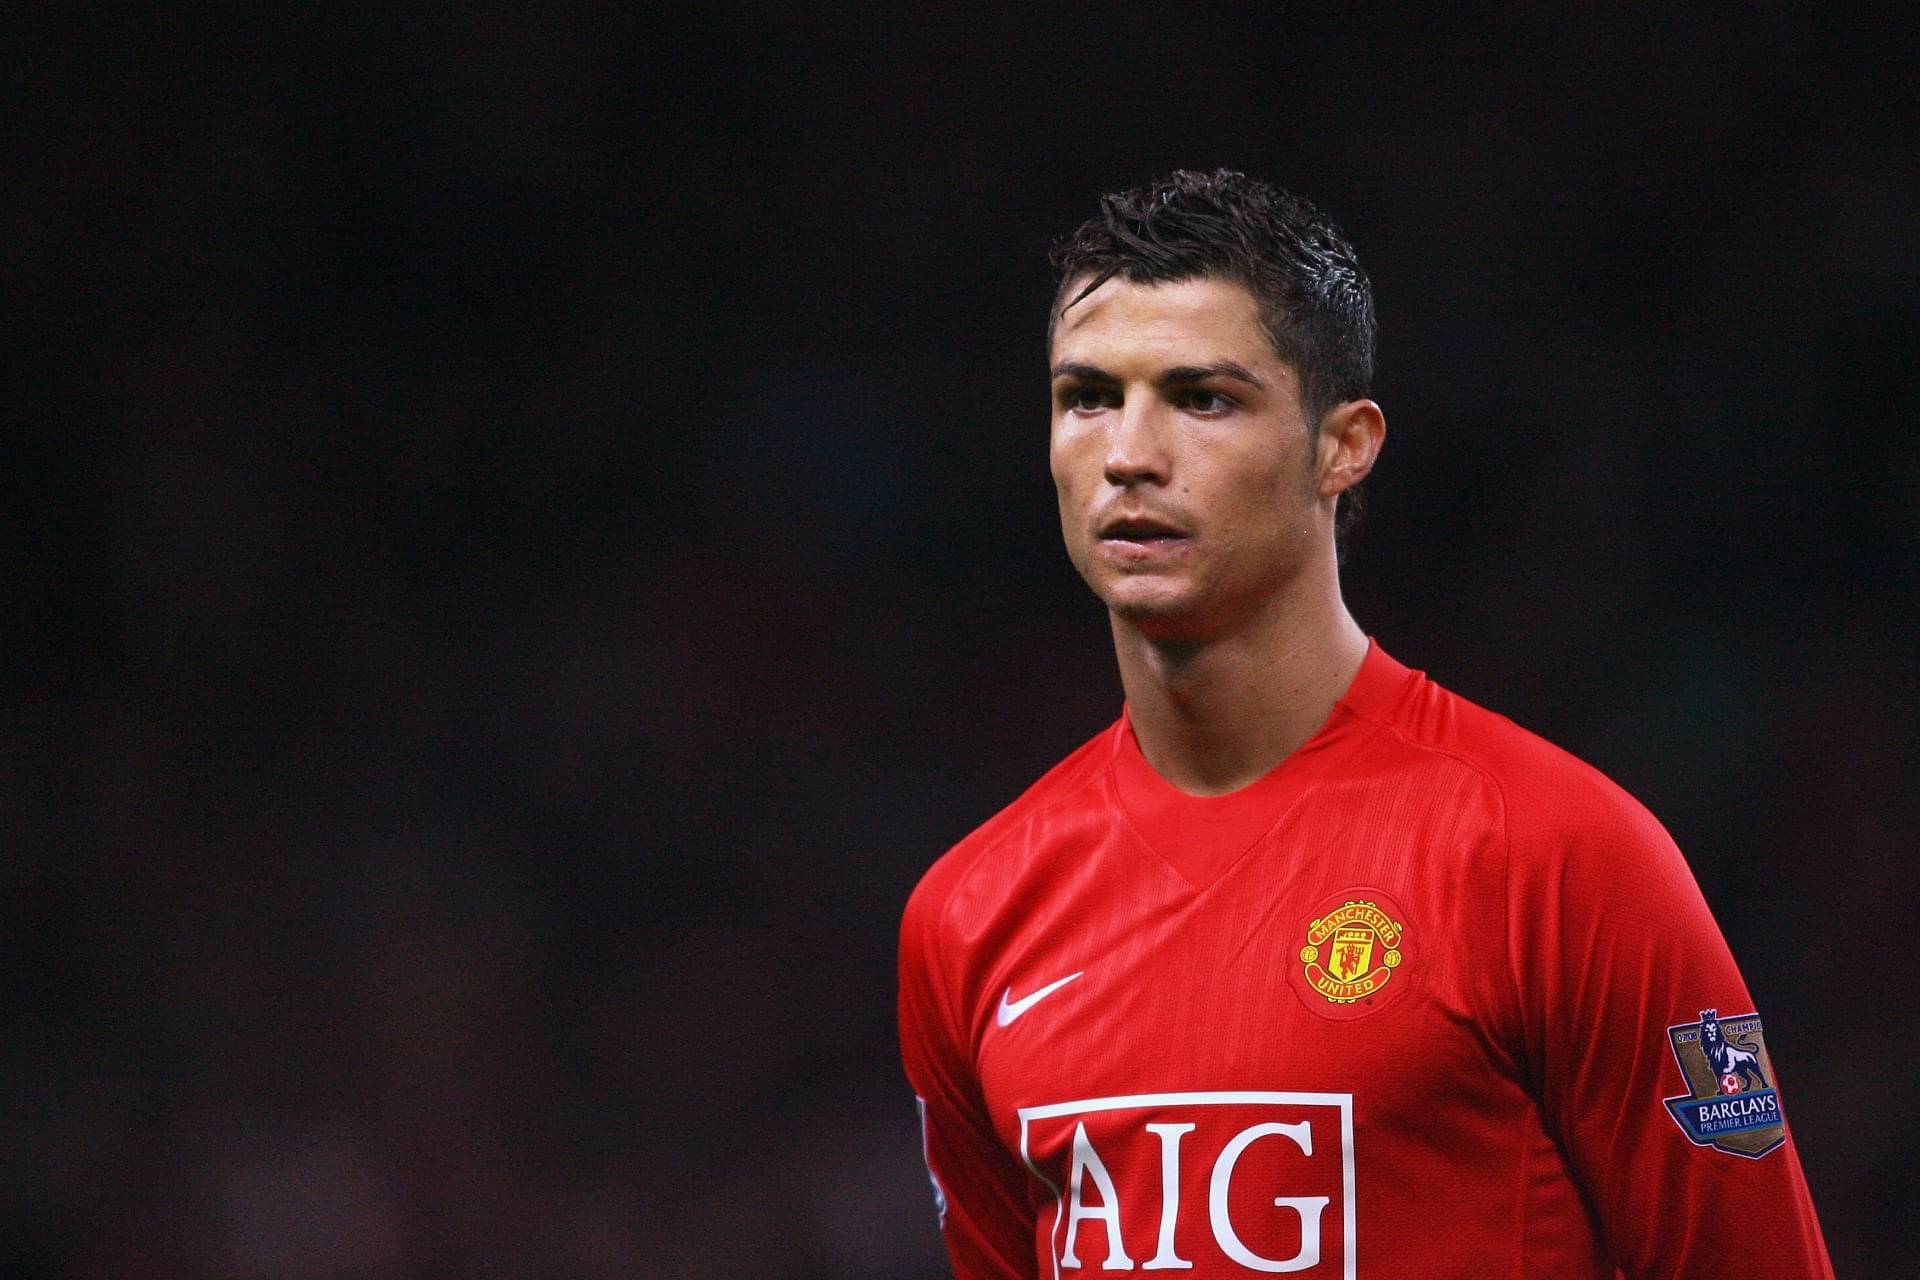 Ronaldo reveals why he wore the number 7 shirt at Manchester United